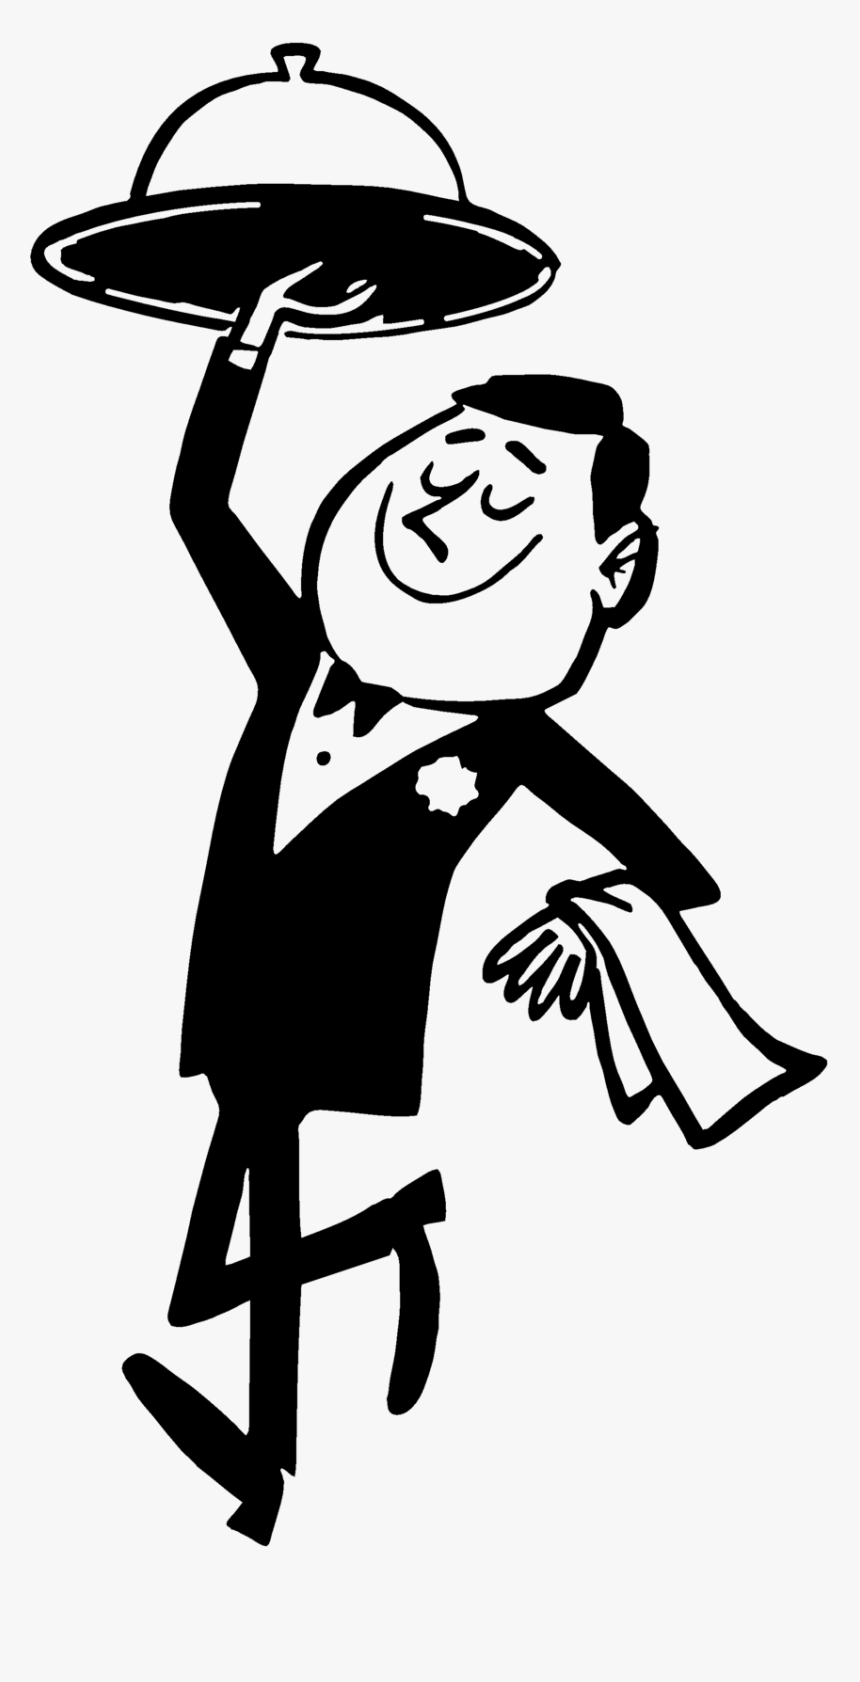 Restaurants Clipart Waiter - Waiter Clipart Black And White, HD Png Download, Free Download